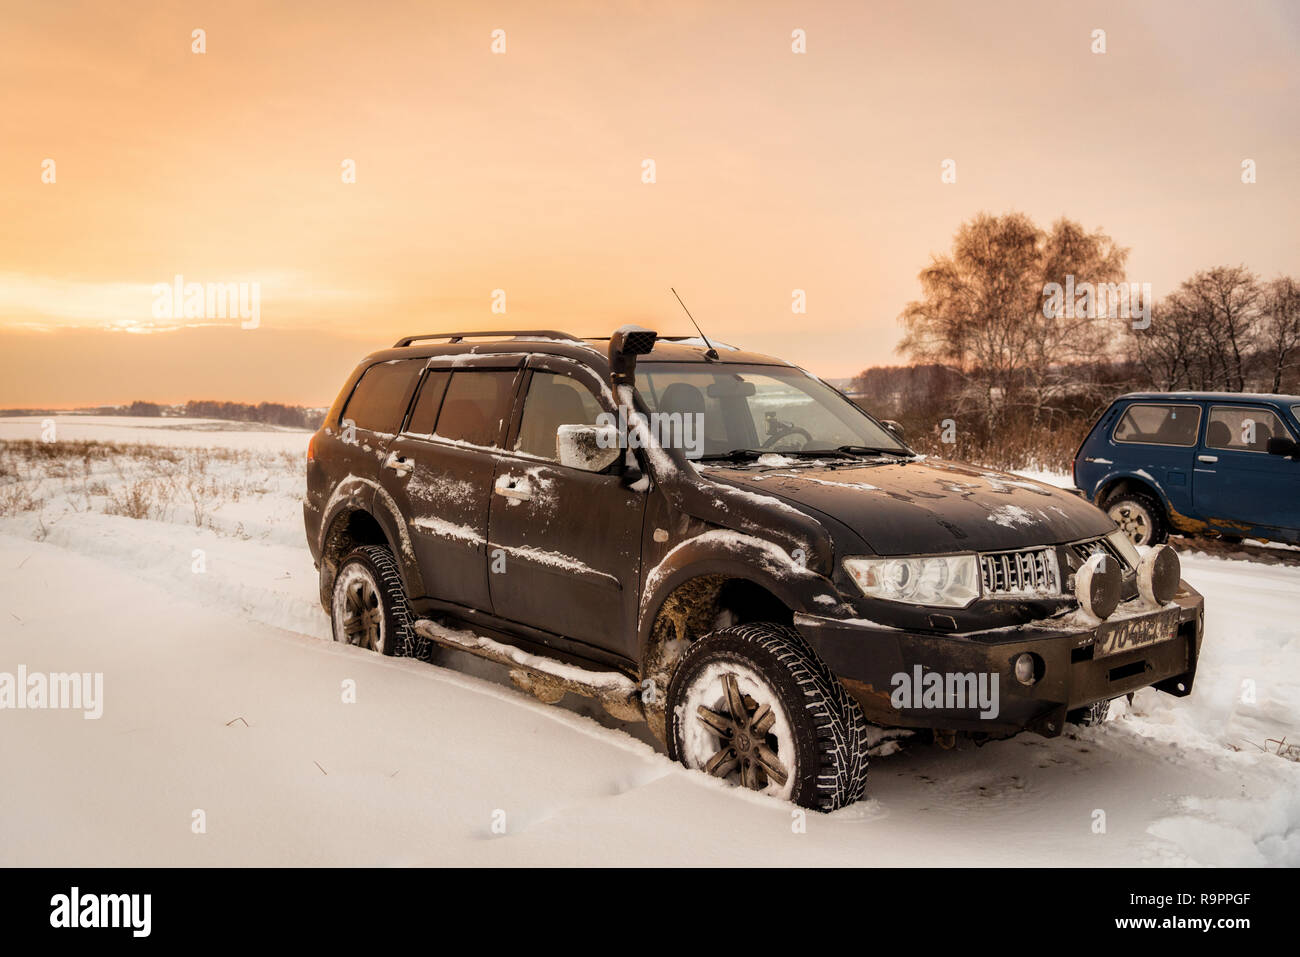 Moscow, Russia - December 25, 2018: Off-road cars Mitsubishi Pajero Sport (Montero) and Lada Niva 4x4 (VAZ 2121 / 21214)  parked on the snow field. Stock Photo